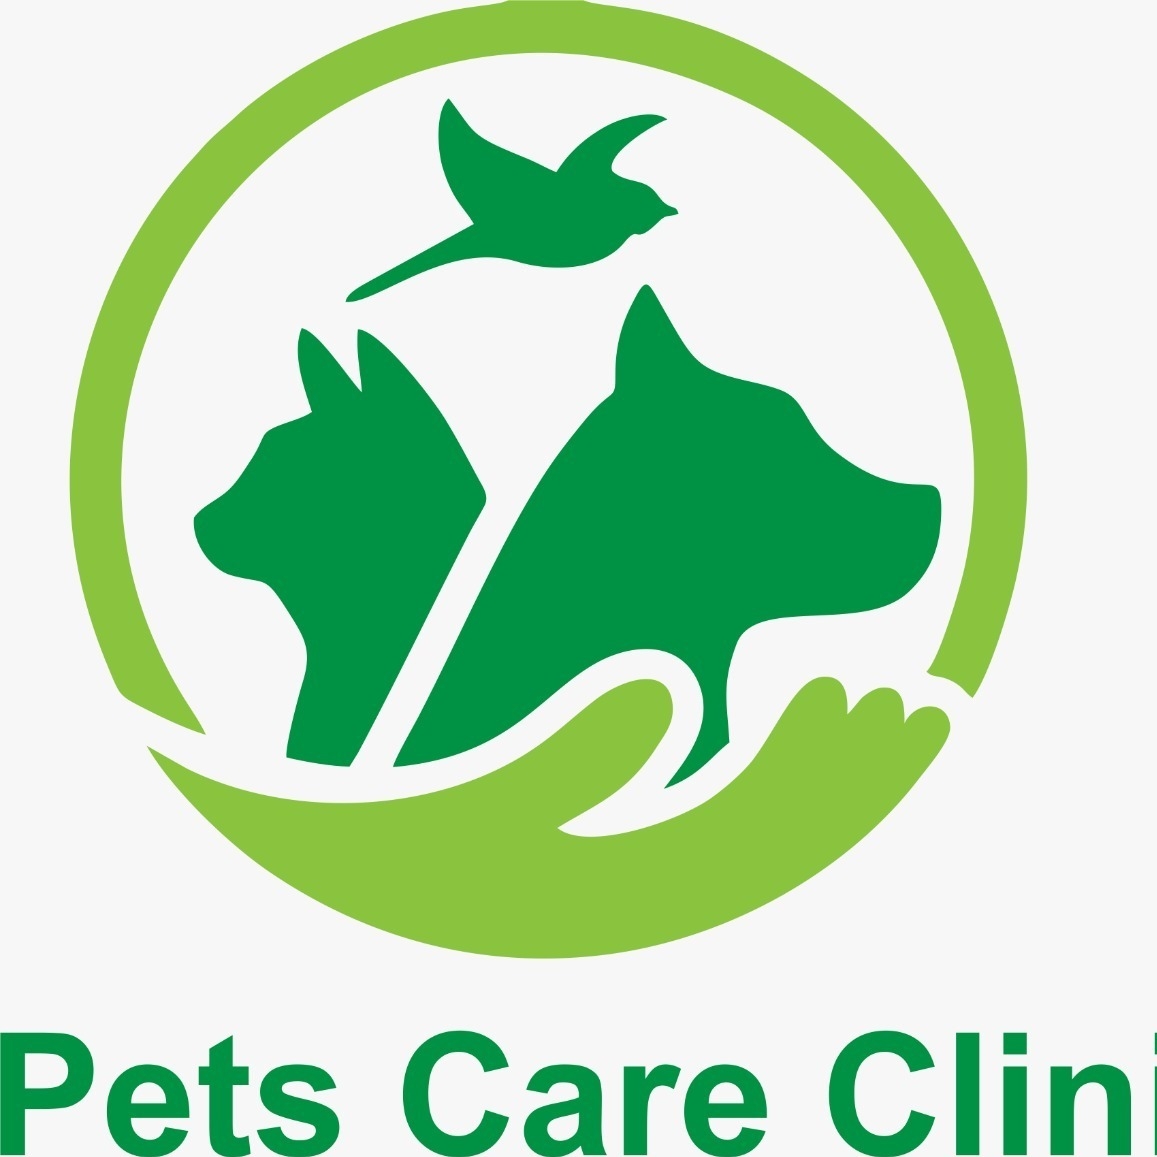 Pets Care Clinic|Healthcare|Medical Services